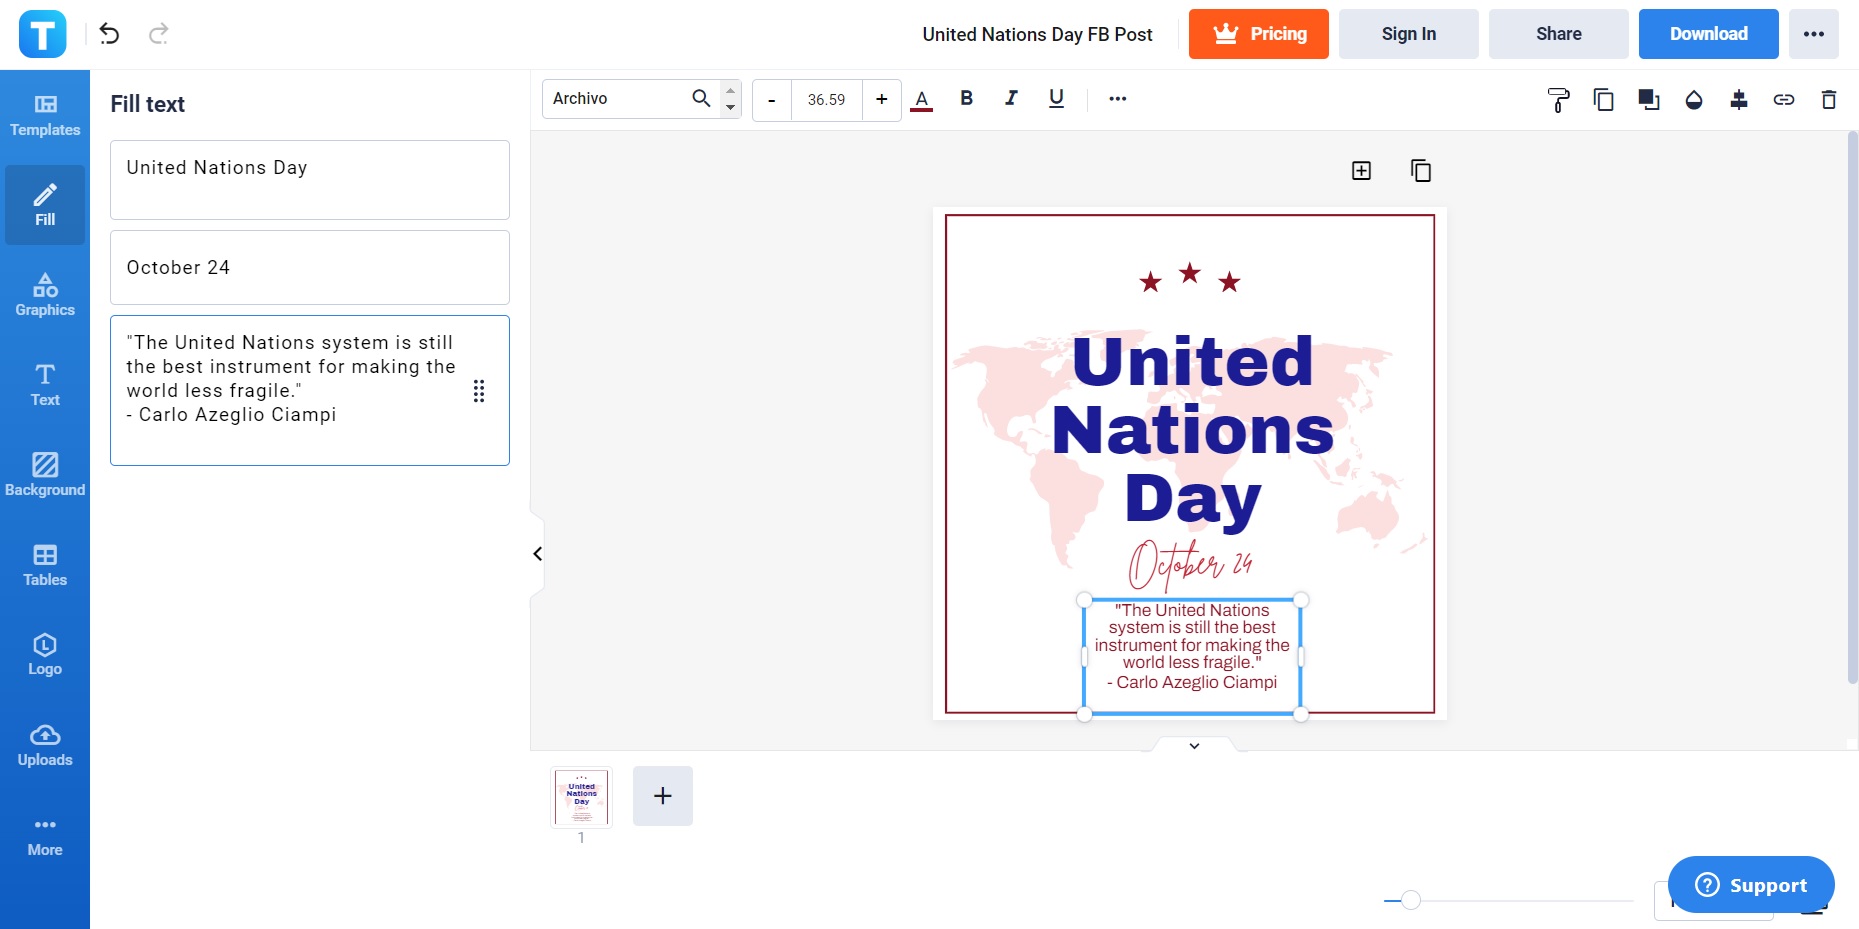 add an encouraging quote about united nations day